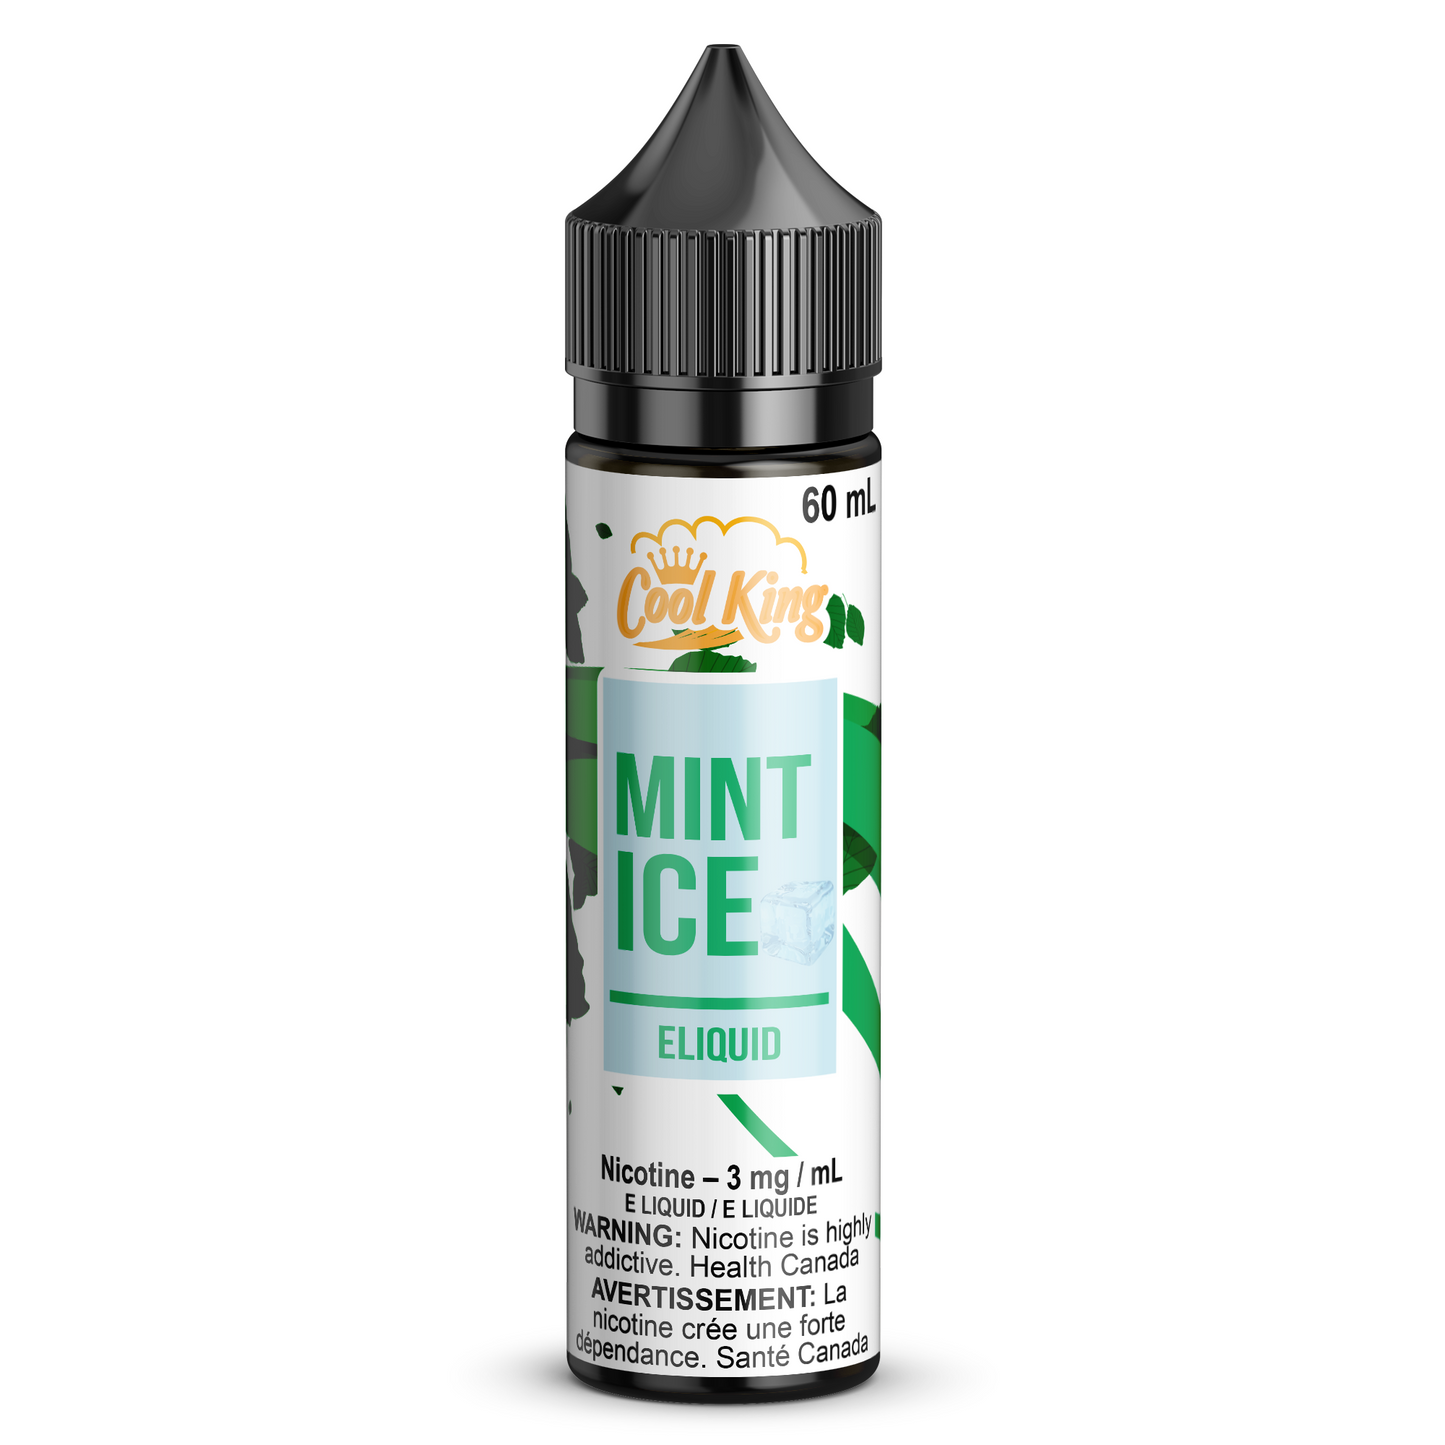 Cool King - Mint Ice